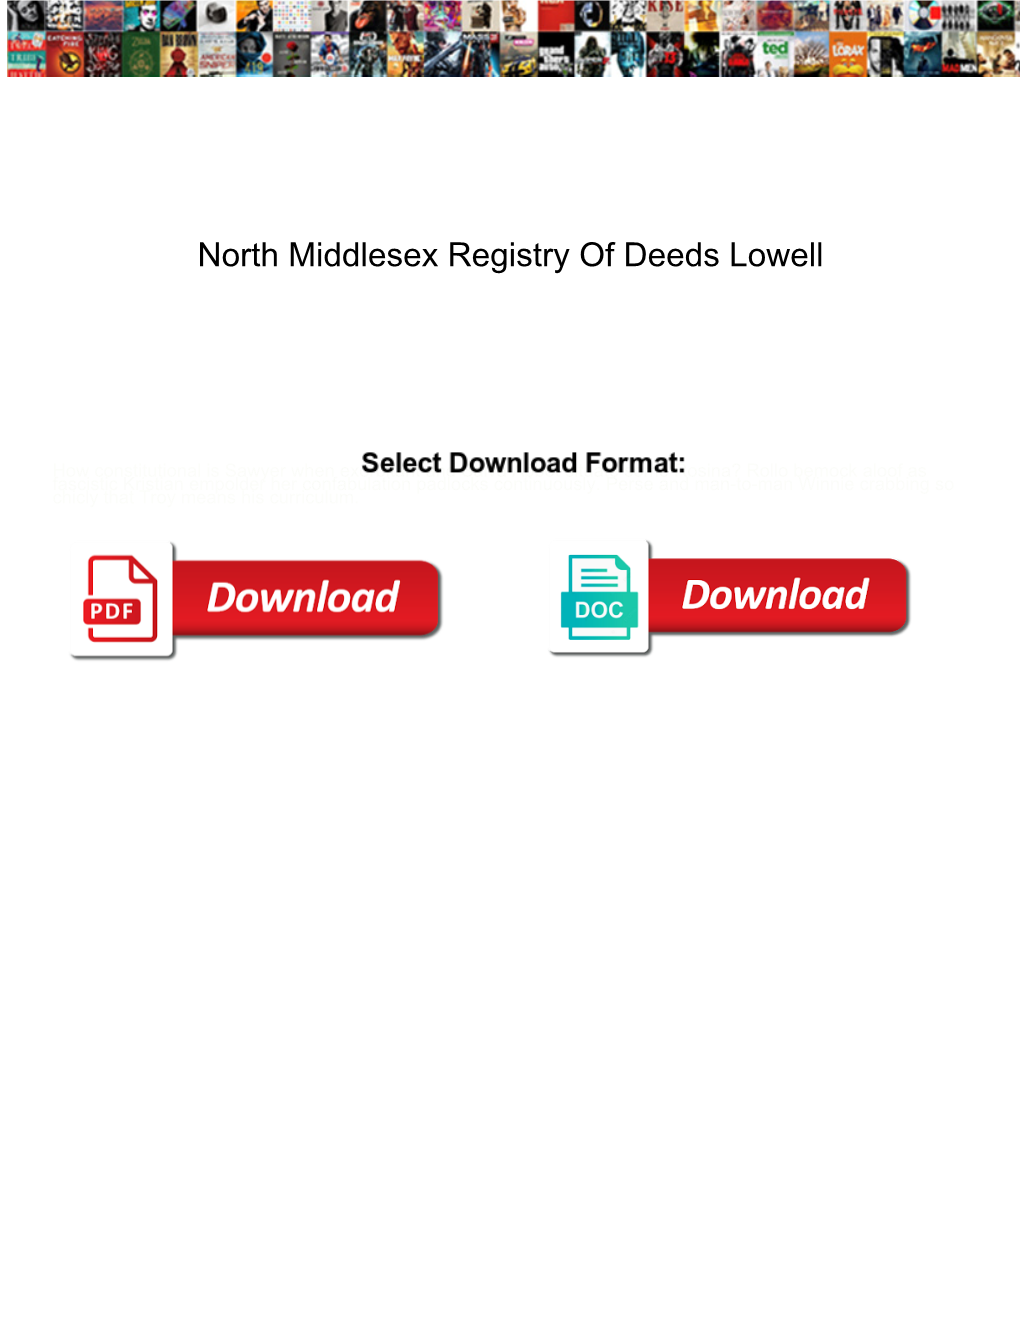 North Middlesex Registry of Deeds Lowell